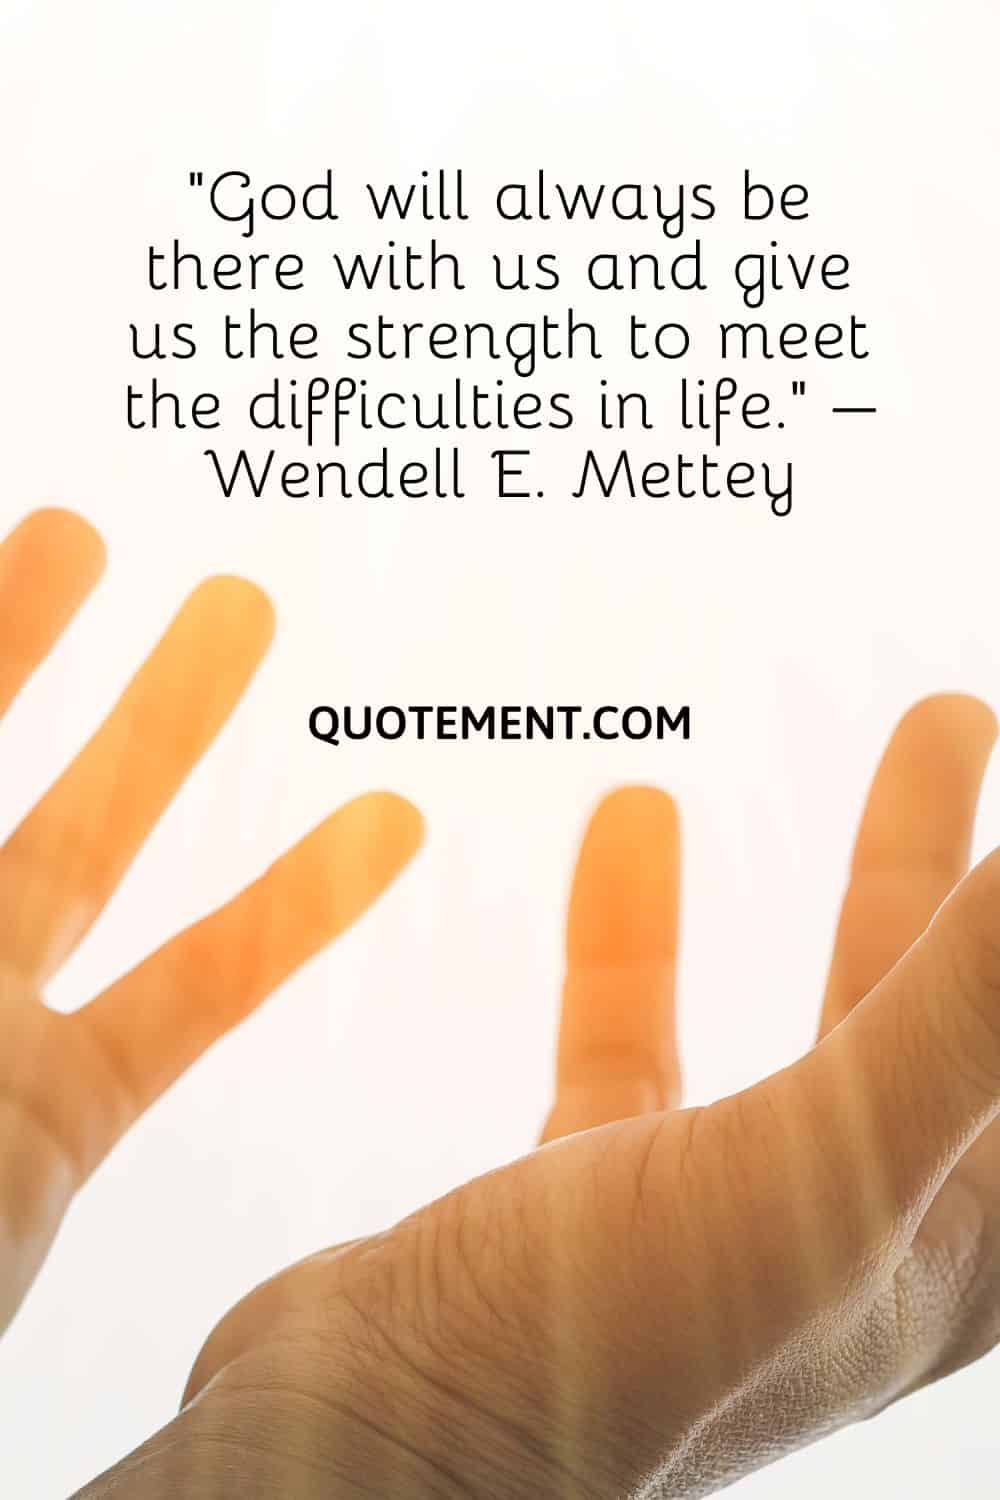 “God will always be there with us and give us the strength to meet the difficulties in life.” – Wendell E. Mettey